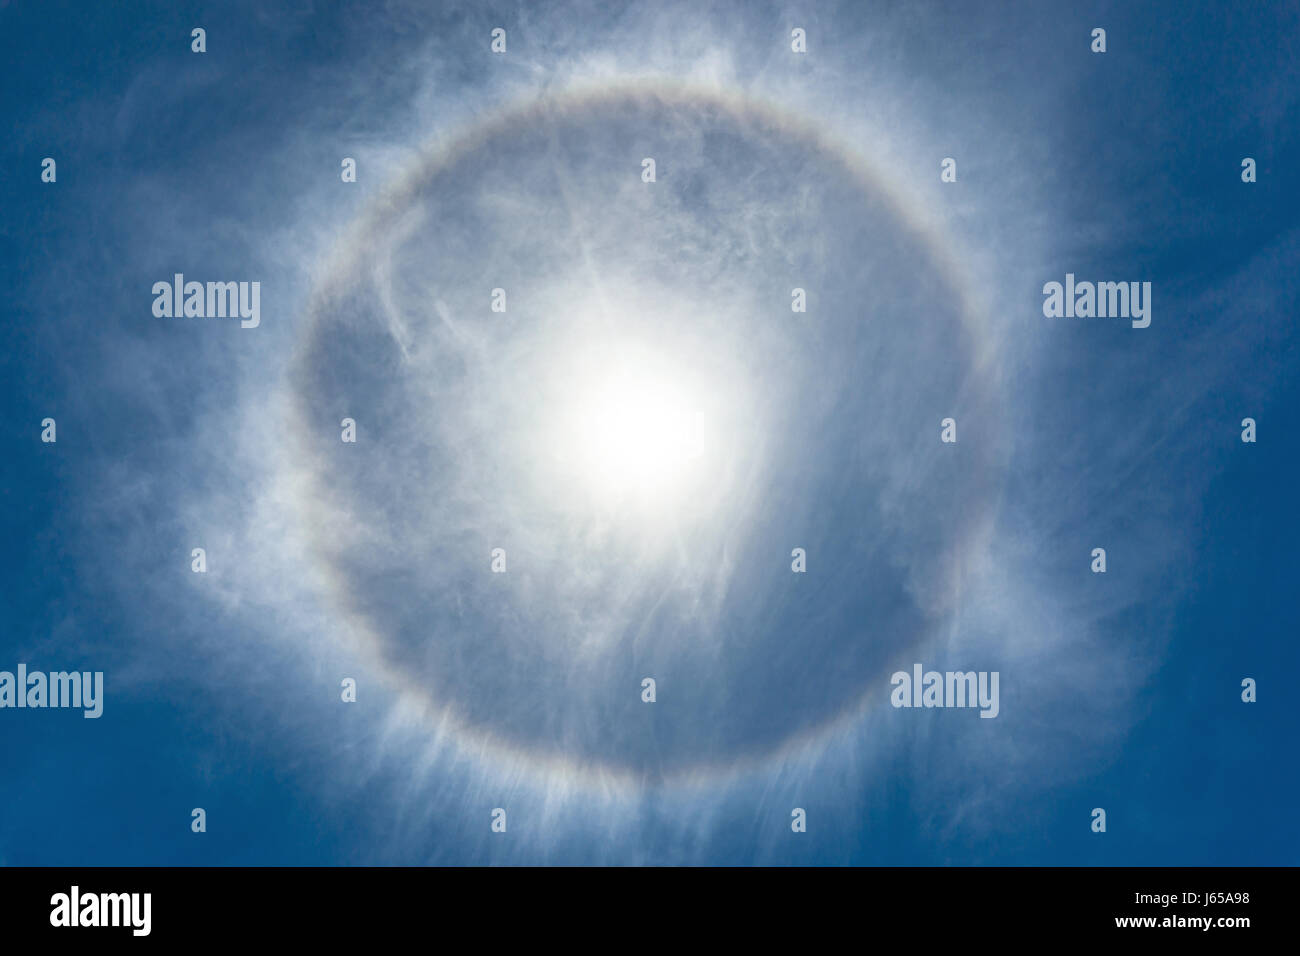 Looking up at a halo around the bright midday sun. Another hot and humid day on a tropical Caribbean island paradise. Stock Photo